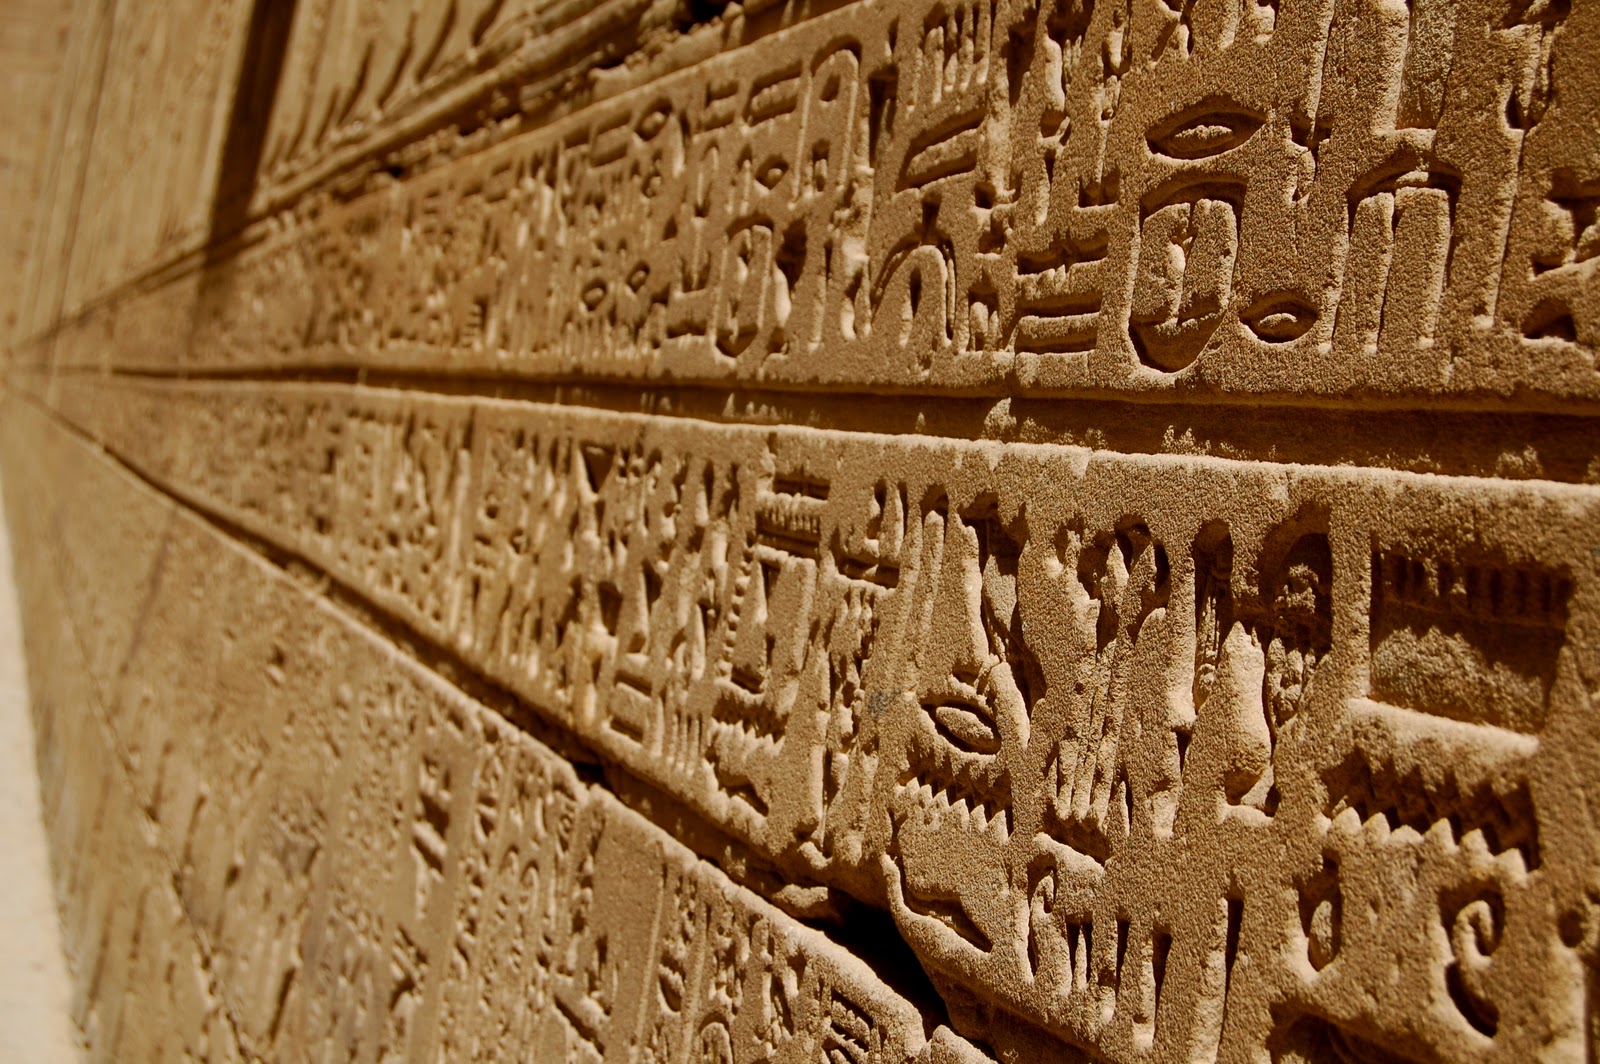 Egyptian Hieroglyphics Wall The Enormous Temple Walls Are